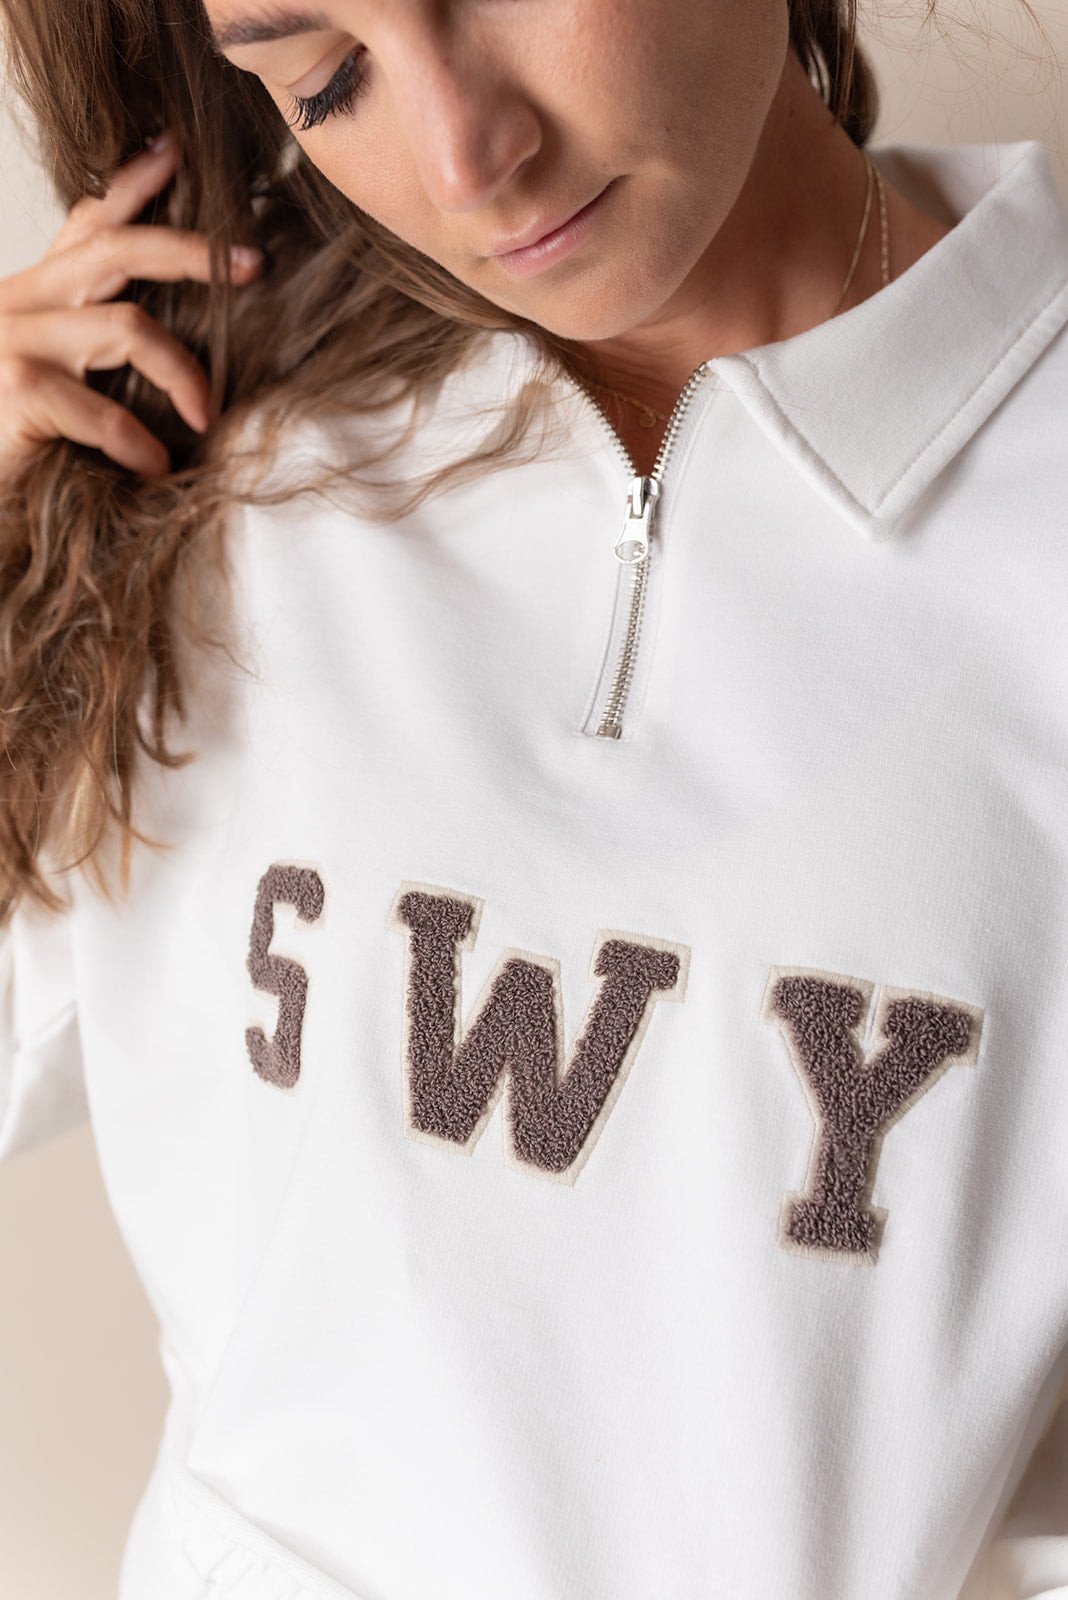 Swy comfortable long sleeve Cheer crop top in white color soft material designed to match the Swy cheer shorts